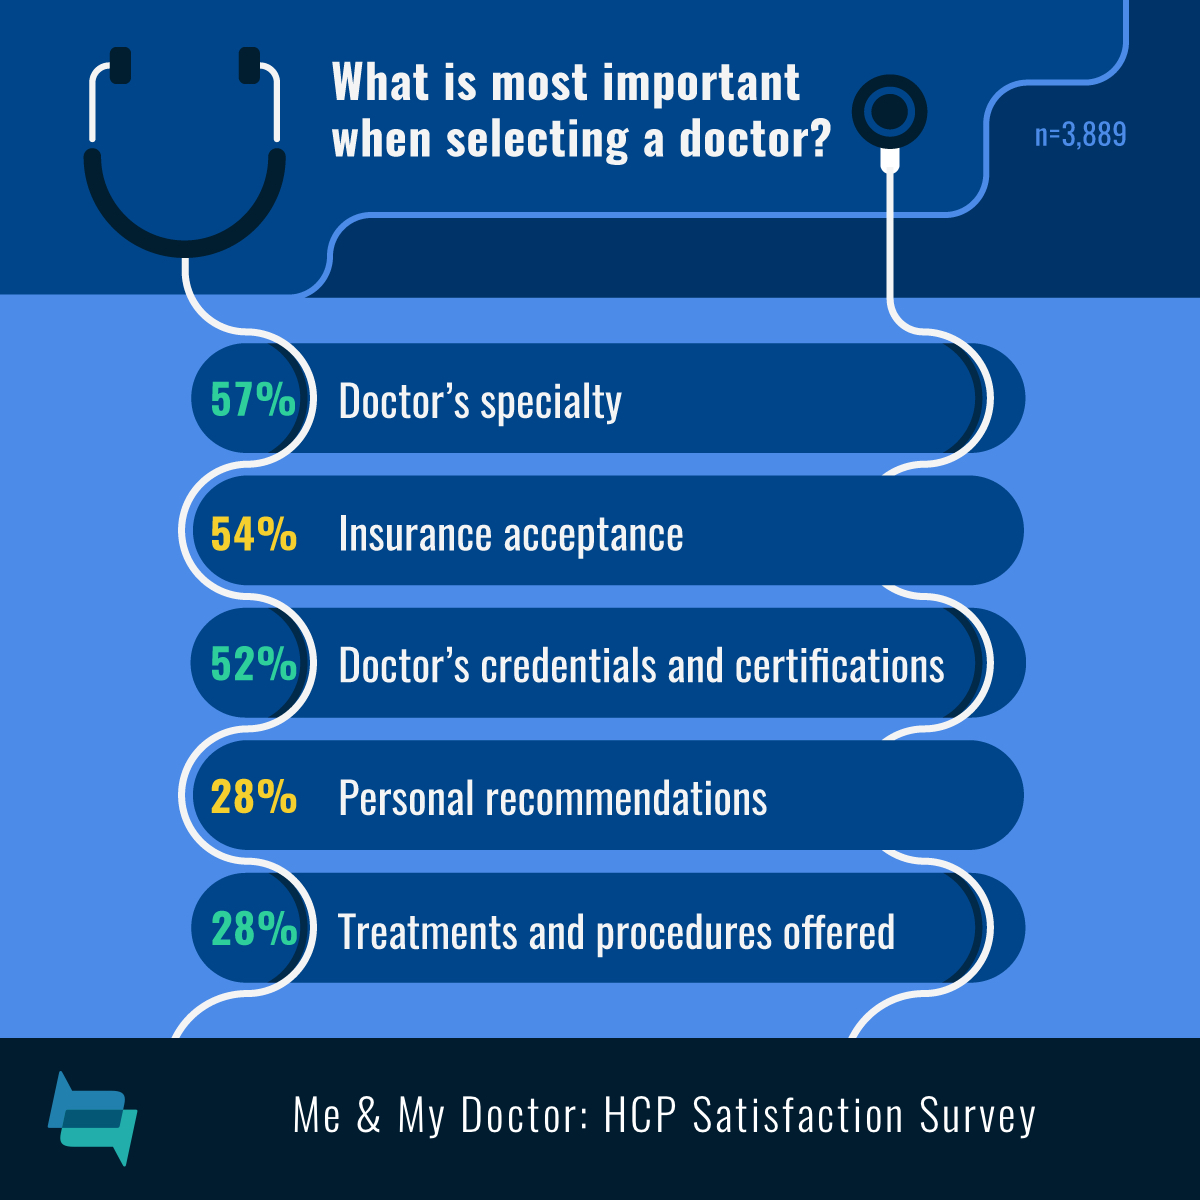 Specialty (57%), insurance (54%), credentials (52%), recommendation (28%), treatments and procedures (28%) affect doctor selection. 